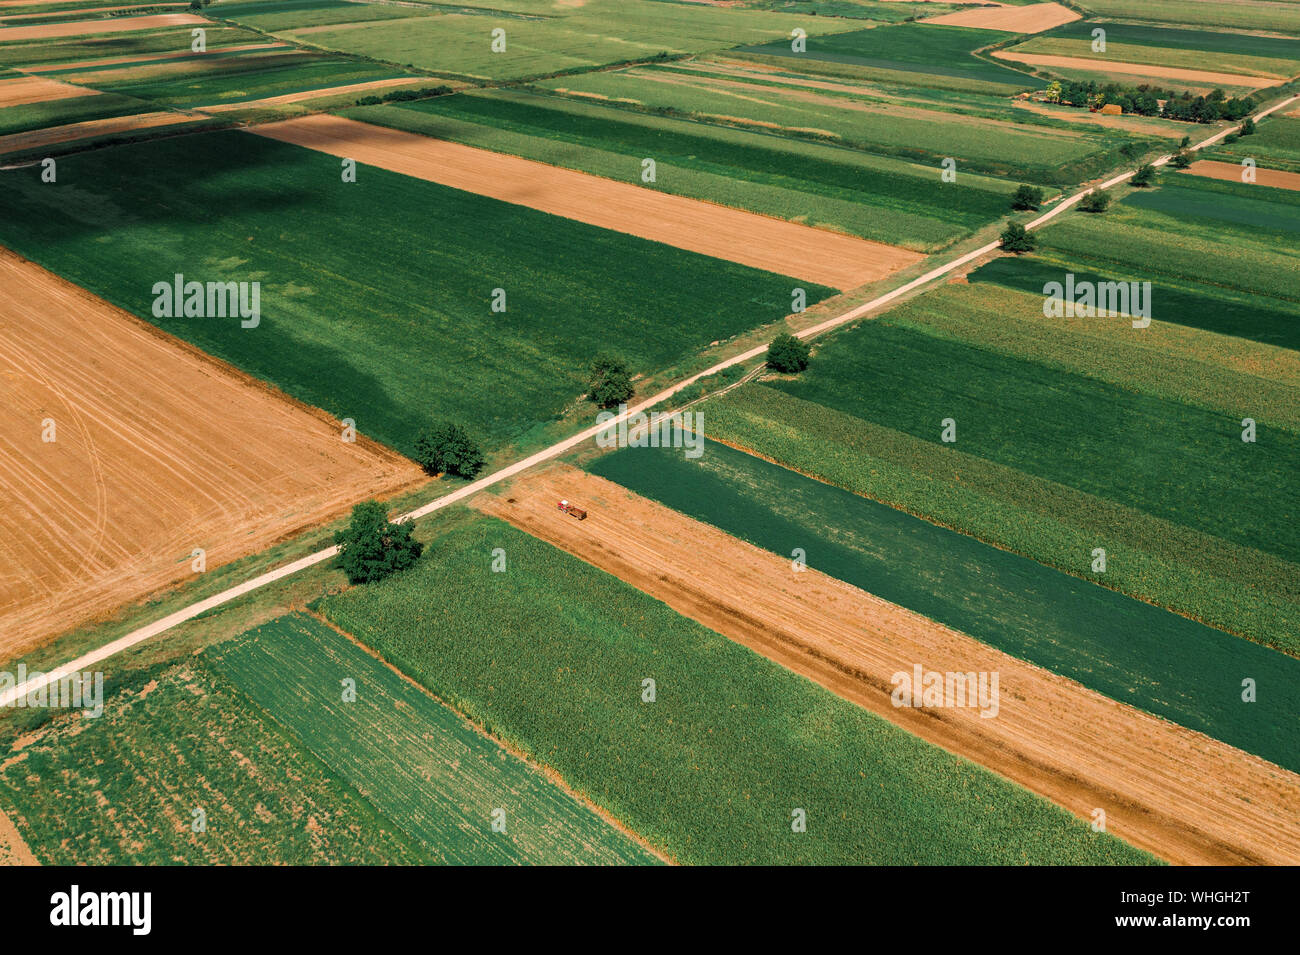 Beautiful countryside patchwork pattern of cultivated landscape from drone pov, fields of corn, soybean and wheat from high angle view Stock Photo